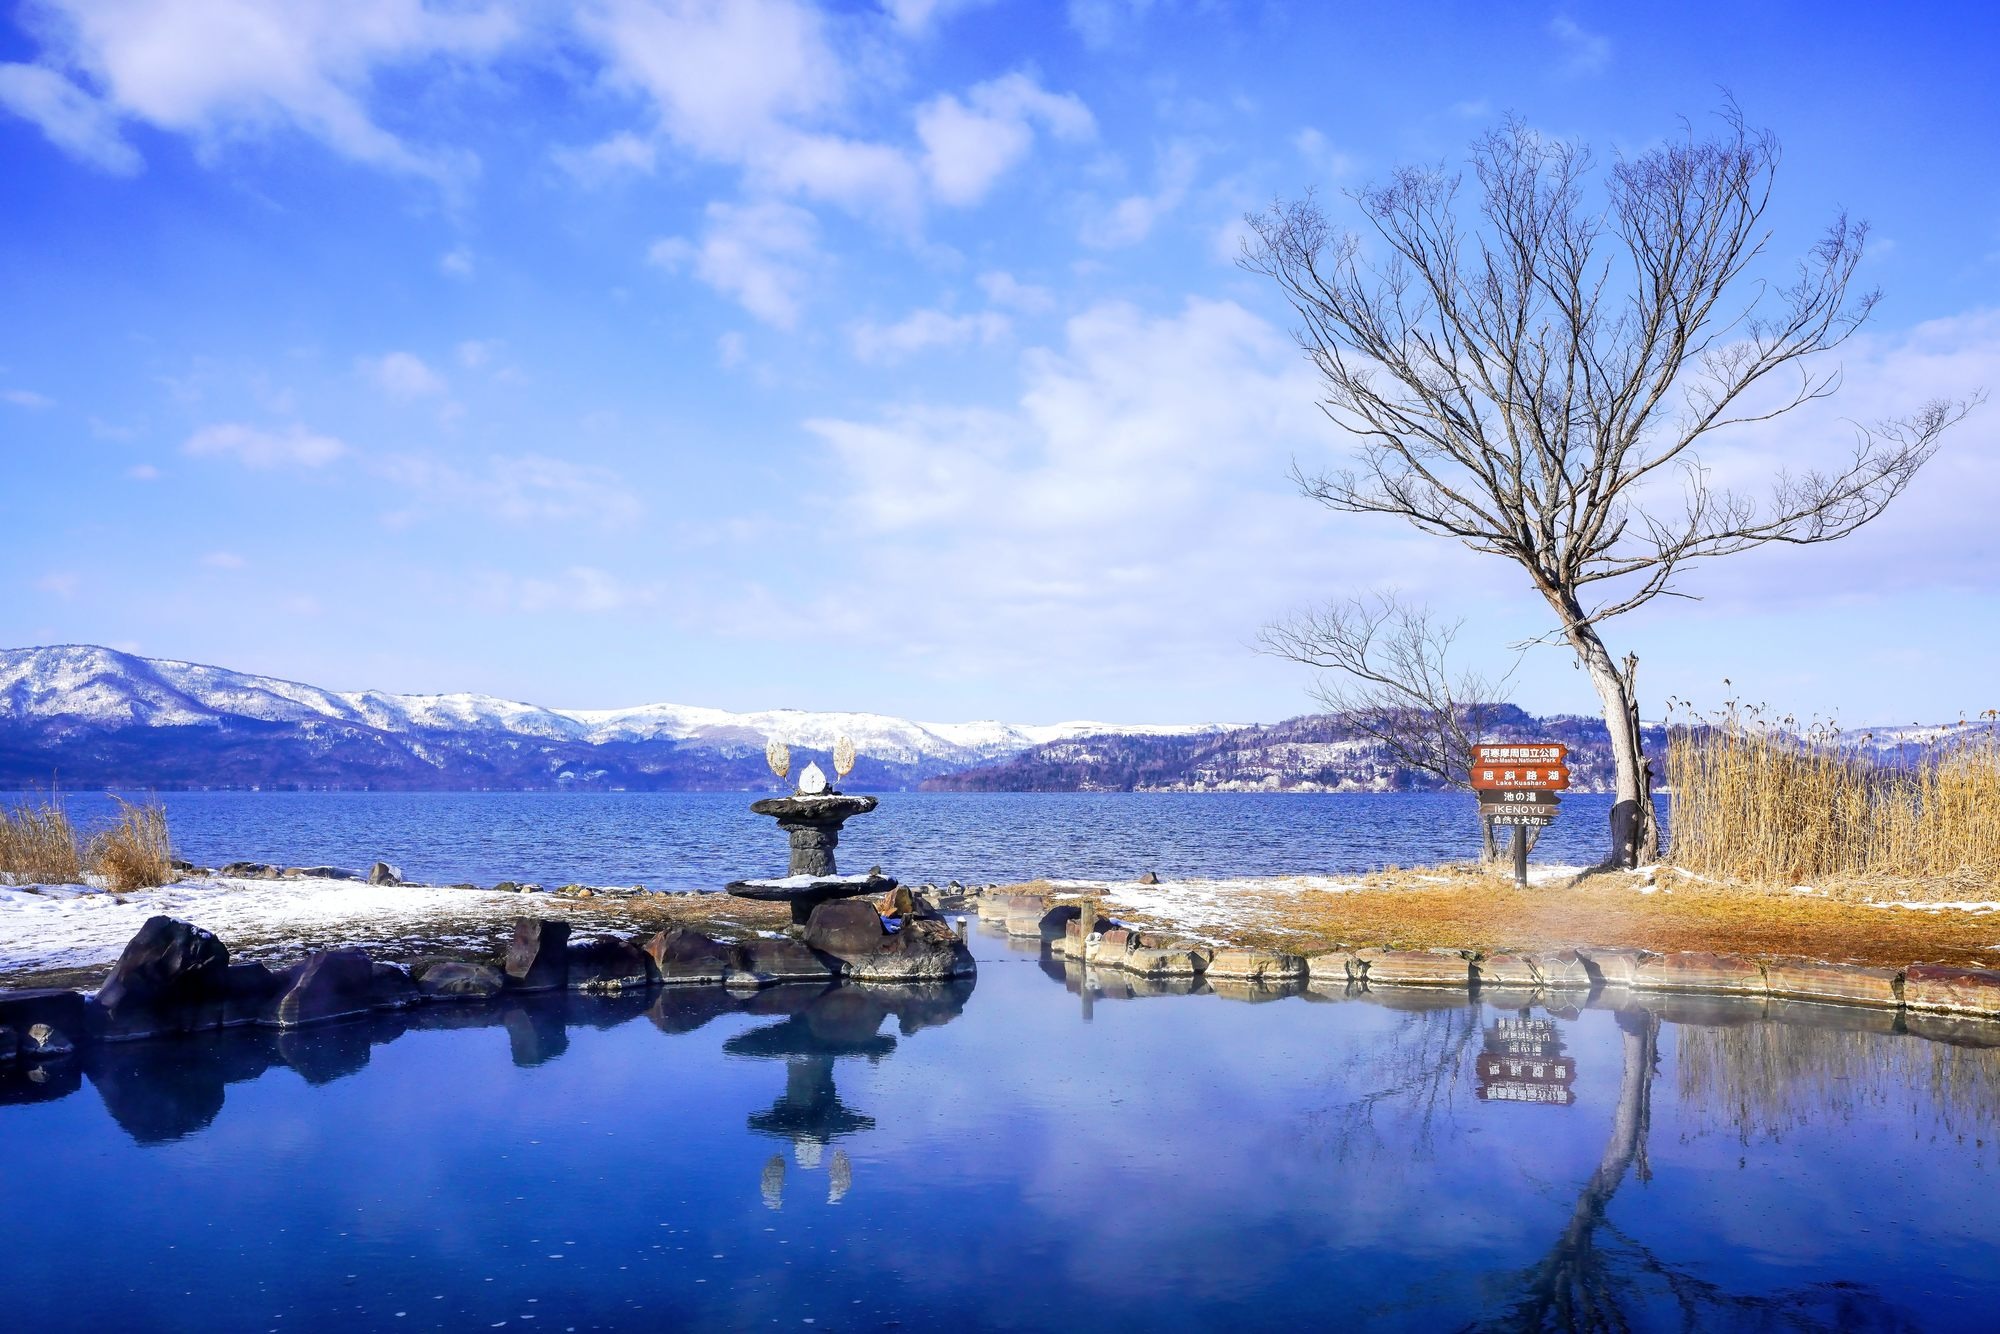 Experience the great nature of Hokkaido! Free outdoor hot spring baths